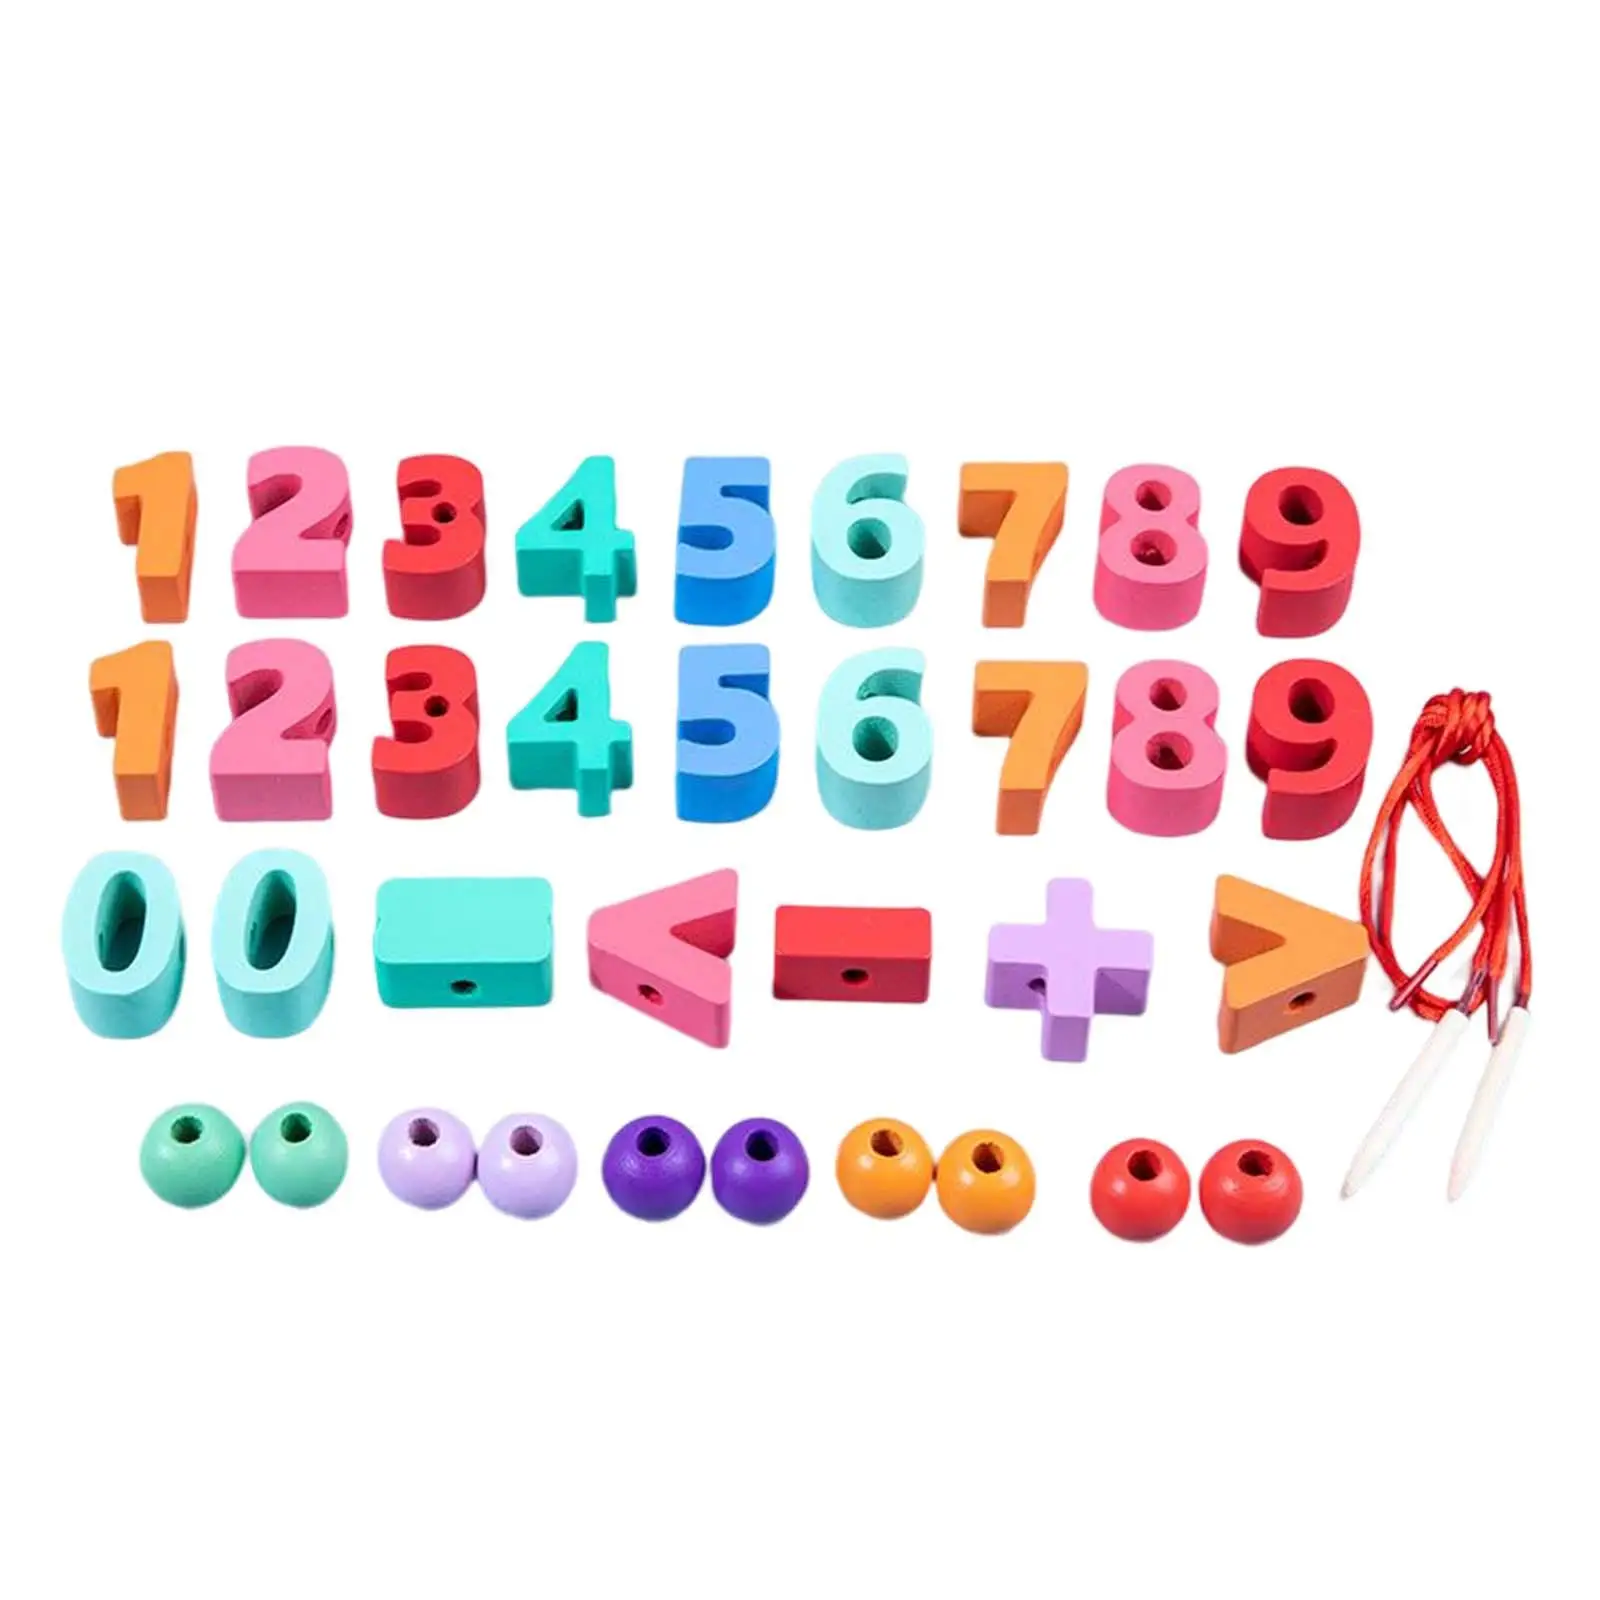 Wooden Lacing Beads Set Developmental Toy 3 Year Old fruits Animal Lacing Beads Preschool Threading Toys for Kids Gift